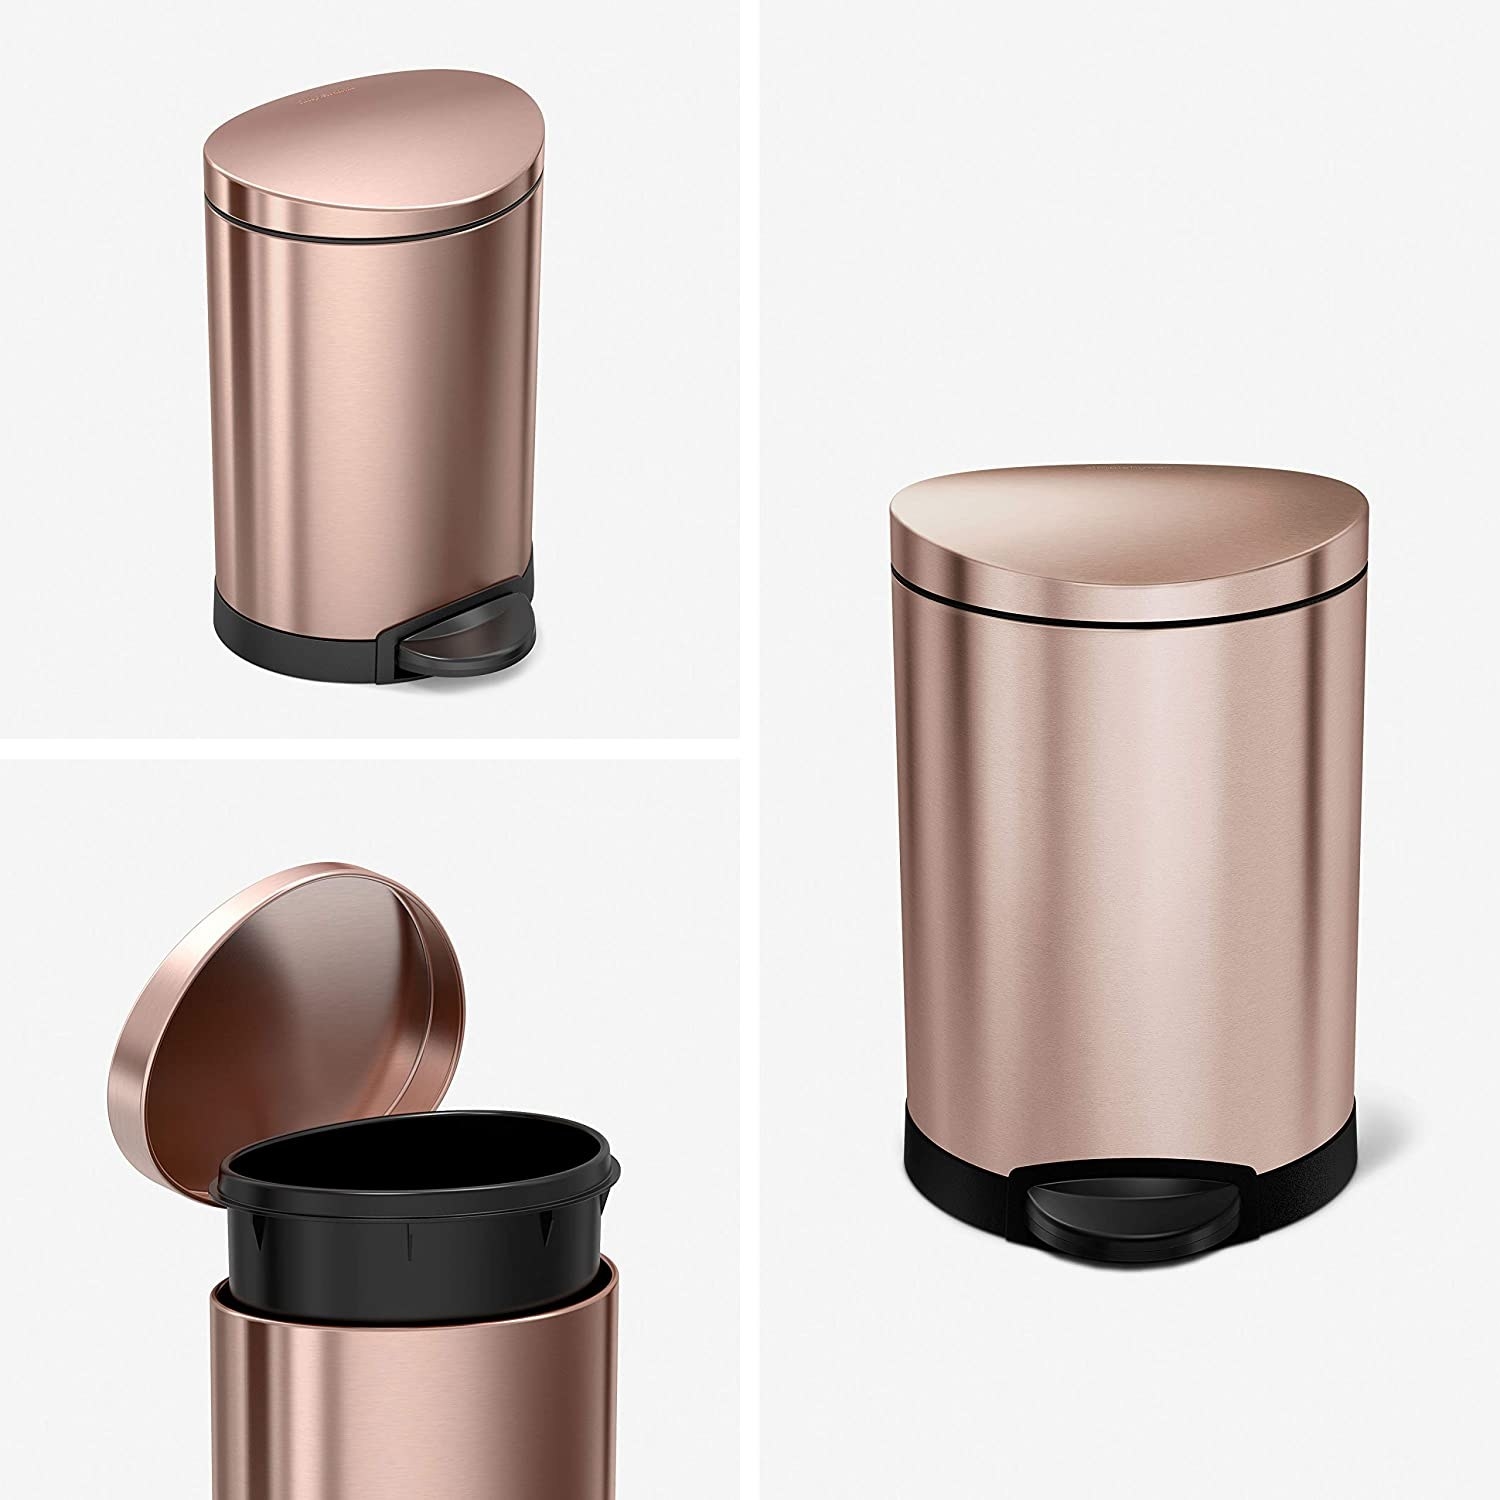 Chic Kitchen Trash Cans — Probably This